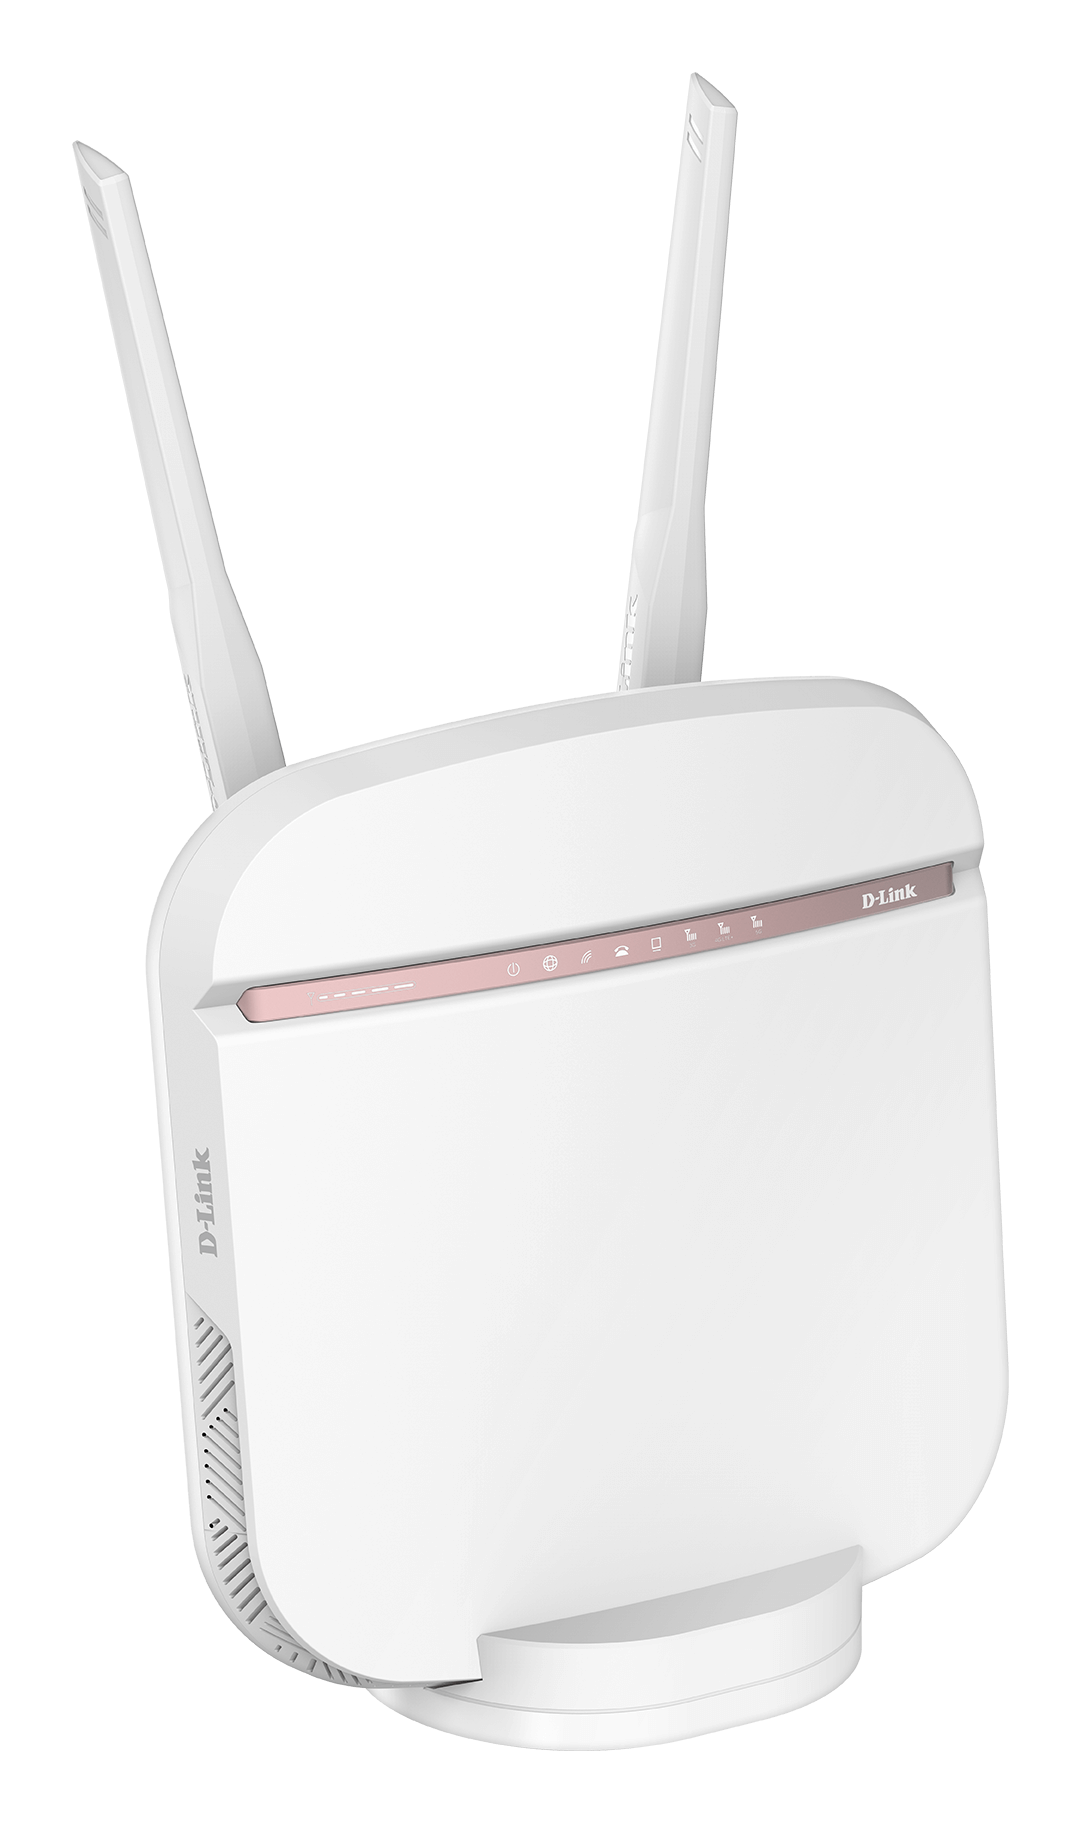 Geonix Introduces 5G SIM-Supported Router to Bridge the